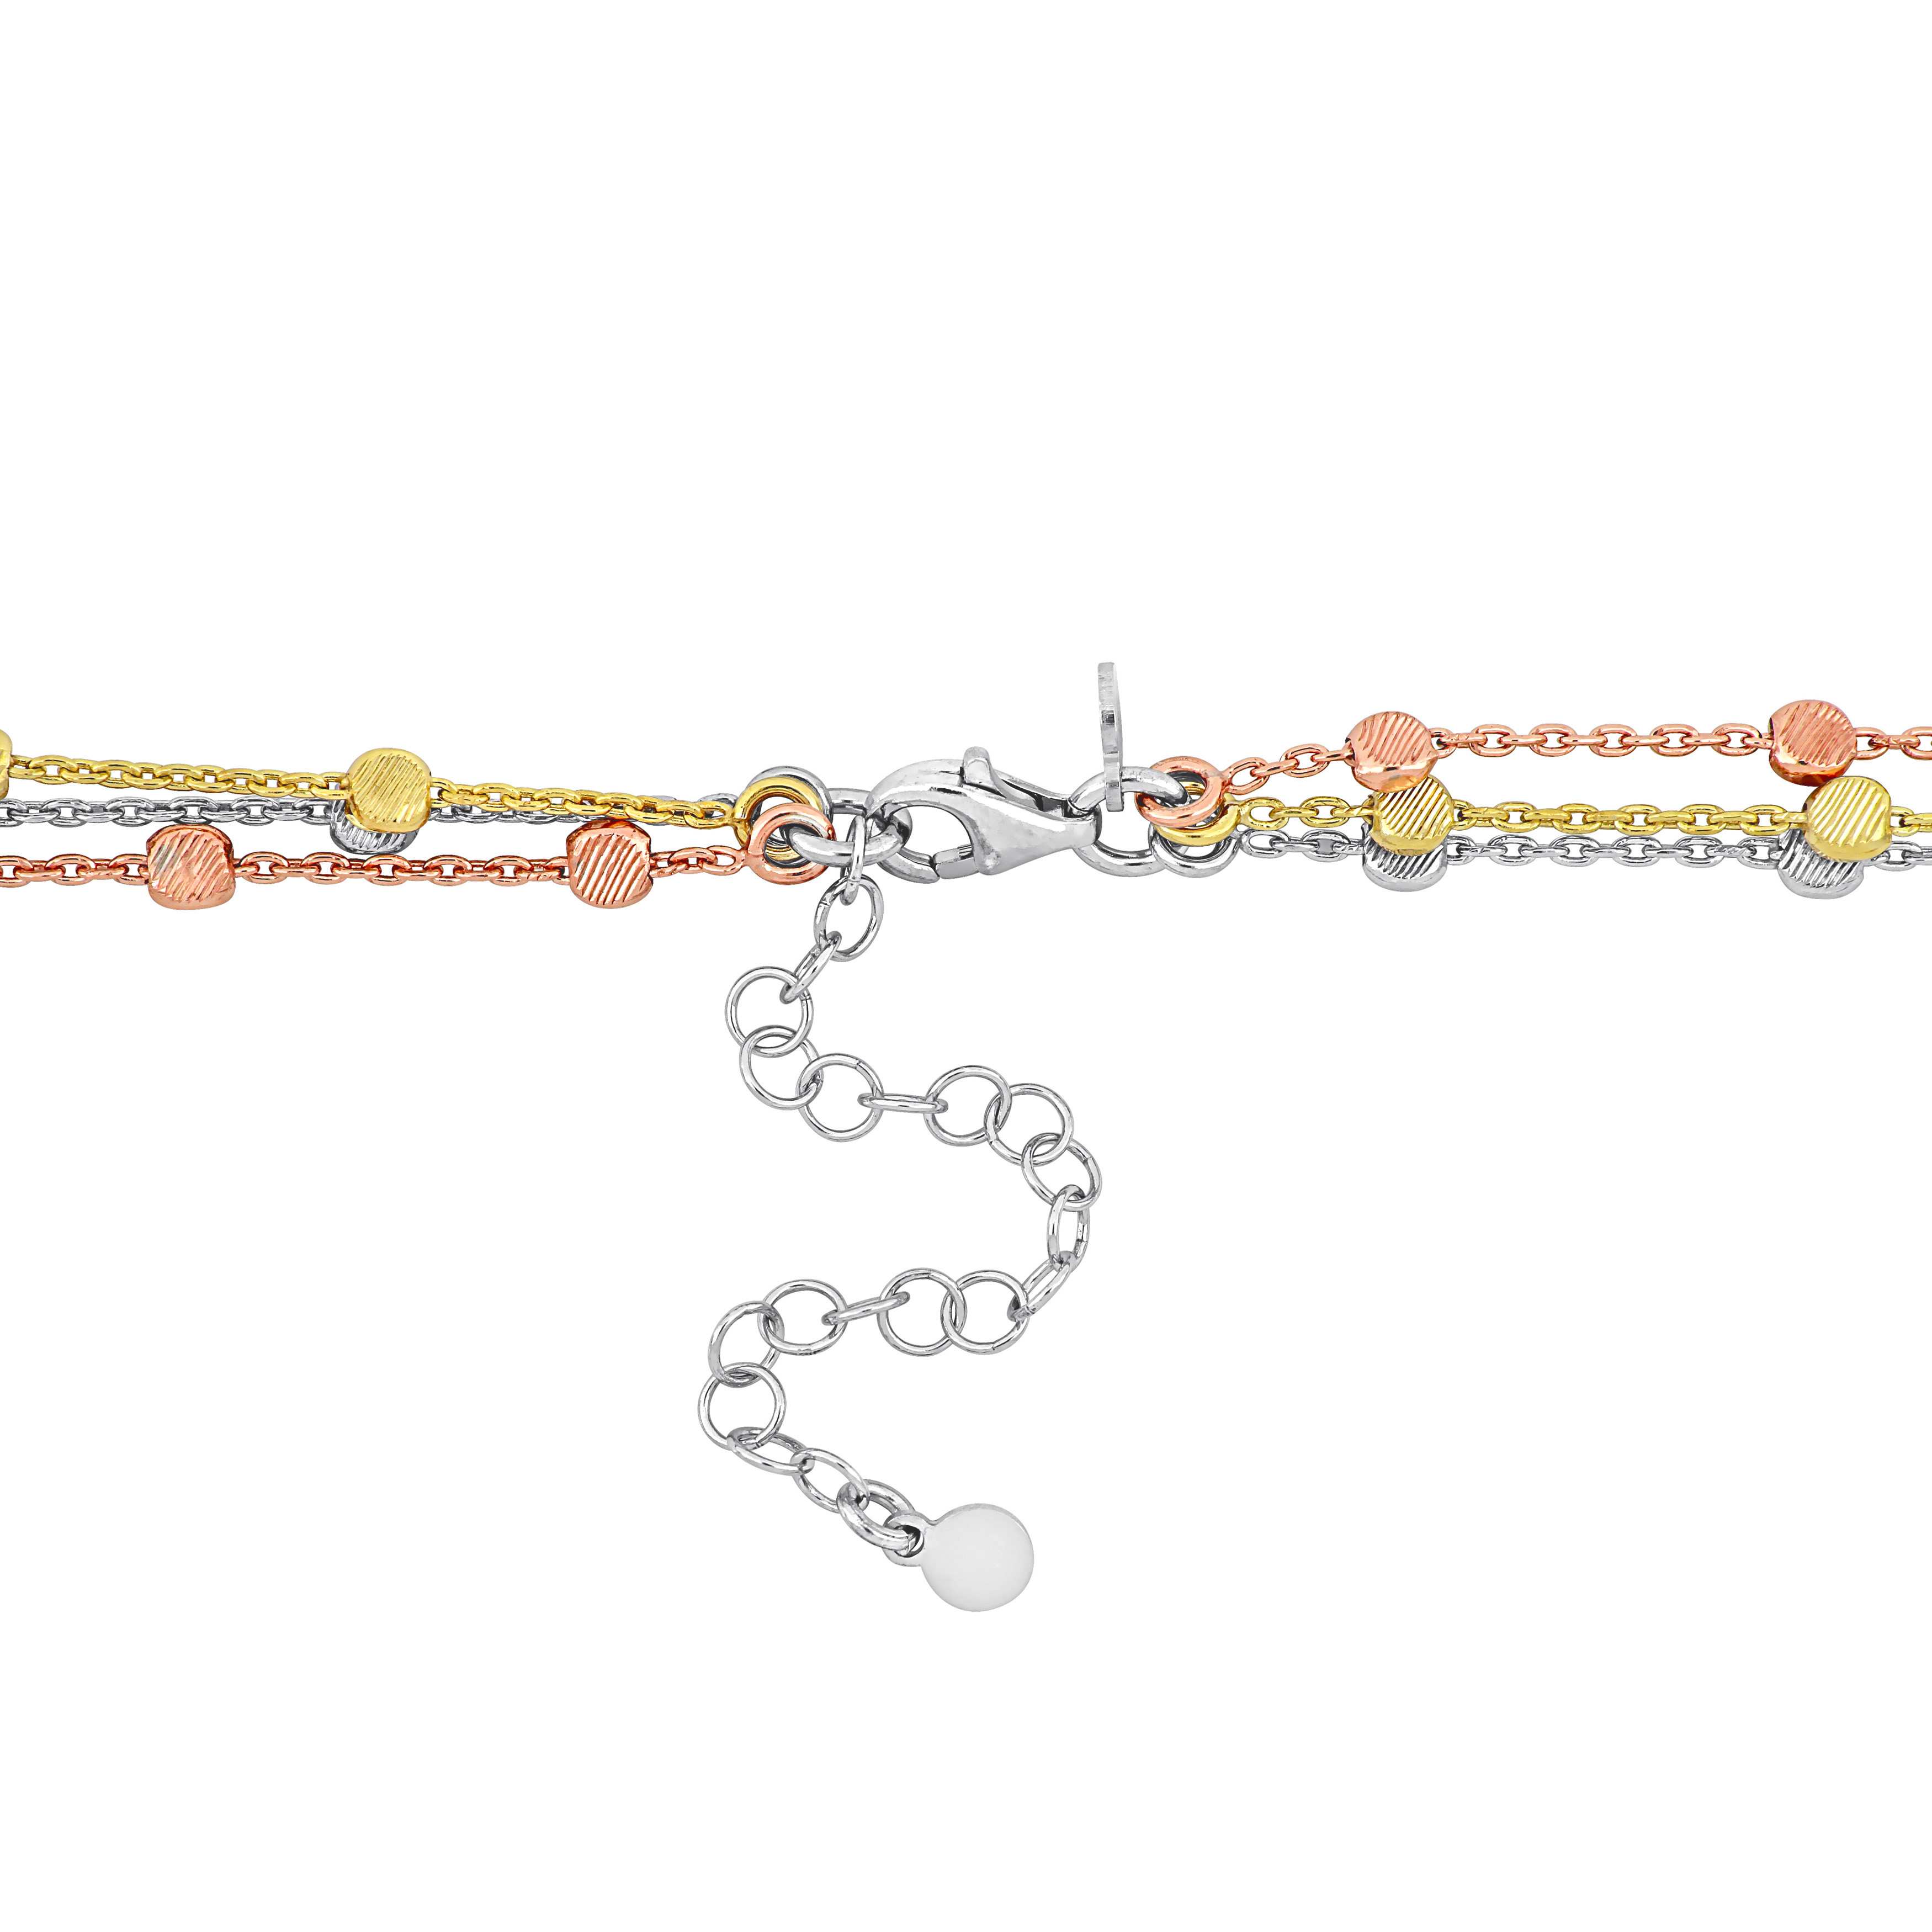 3-Strand Ball Station Necklace in 3-Tone Rose Yellow and White Sterling Silver - 16+2 in.